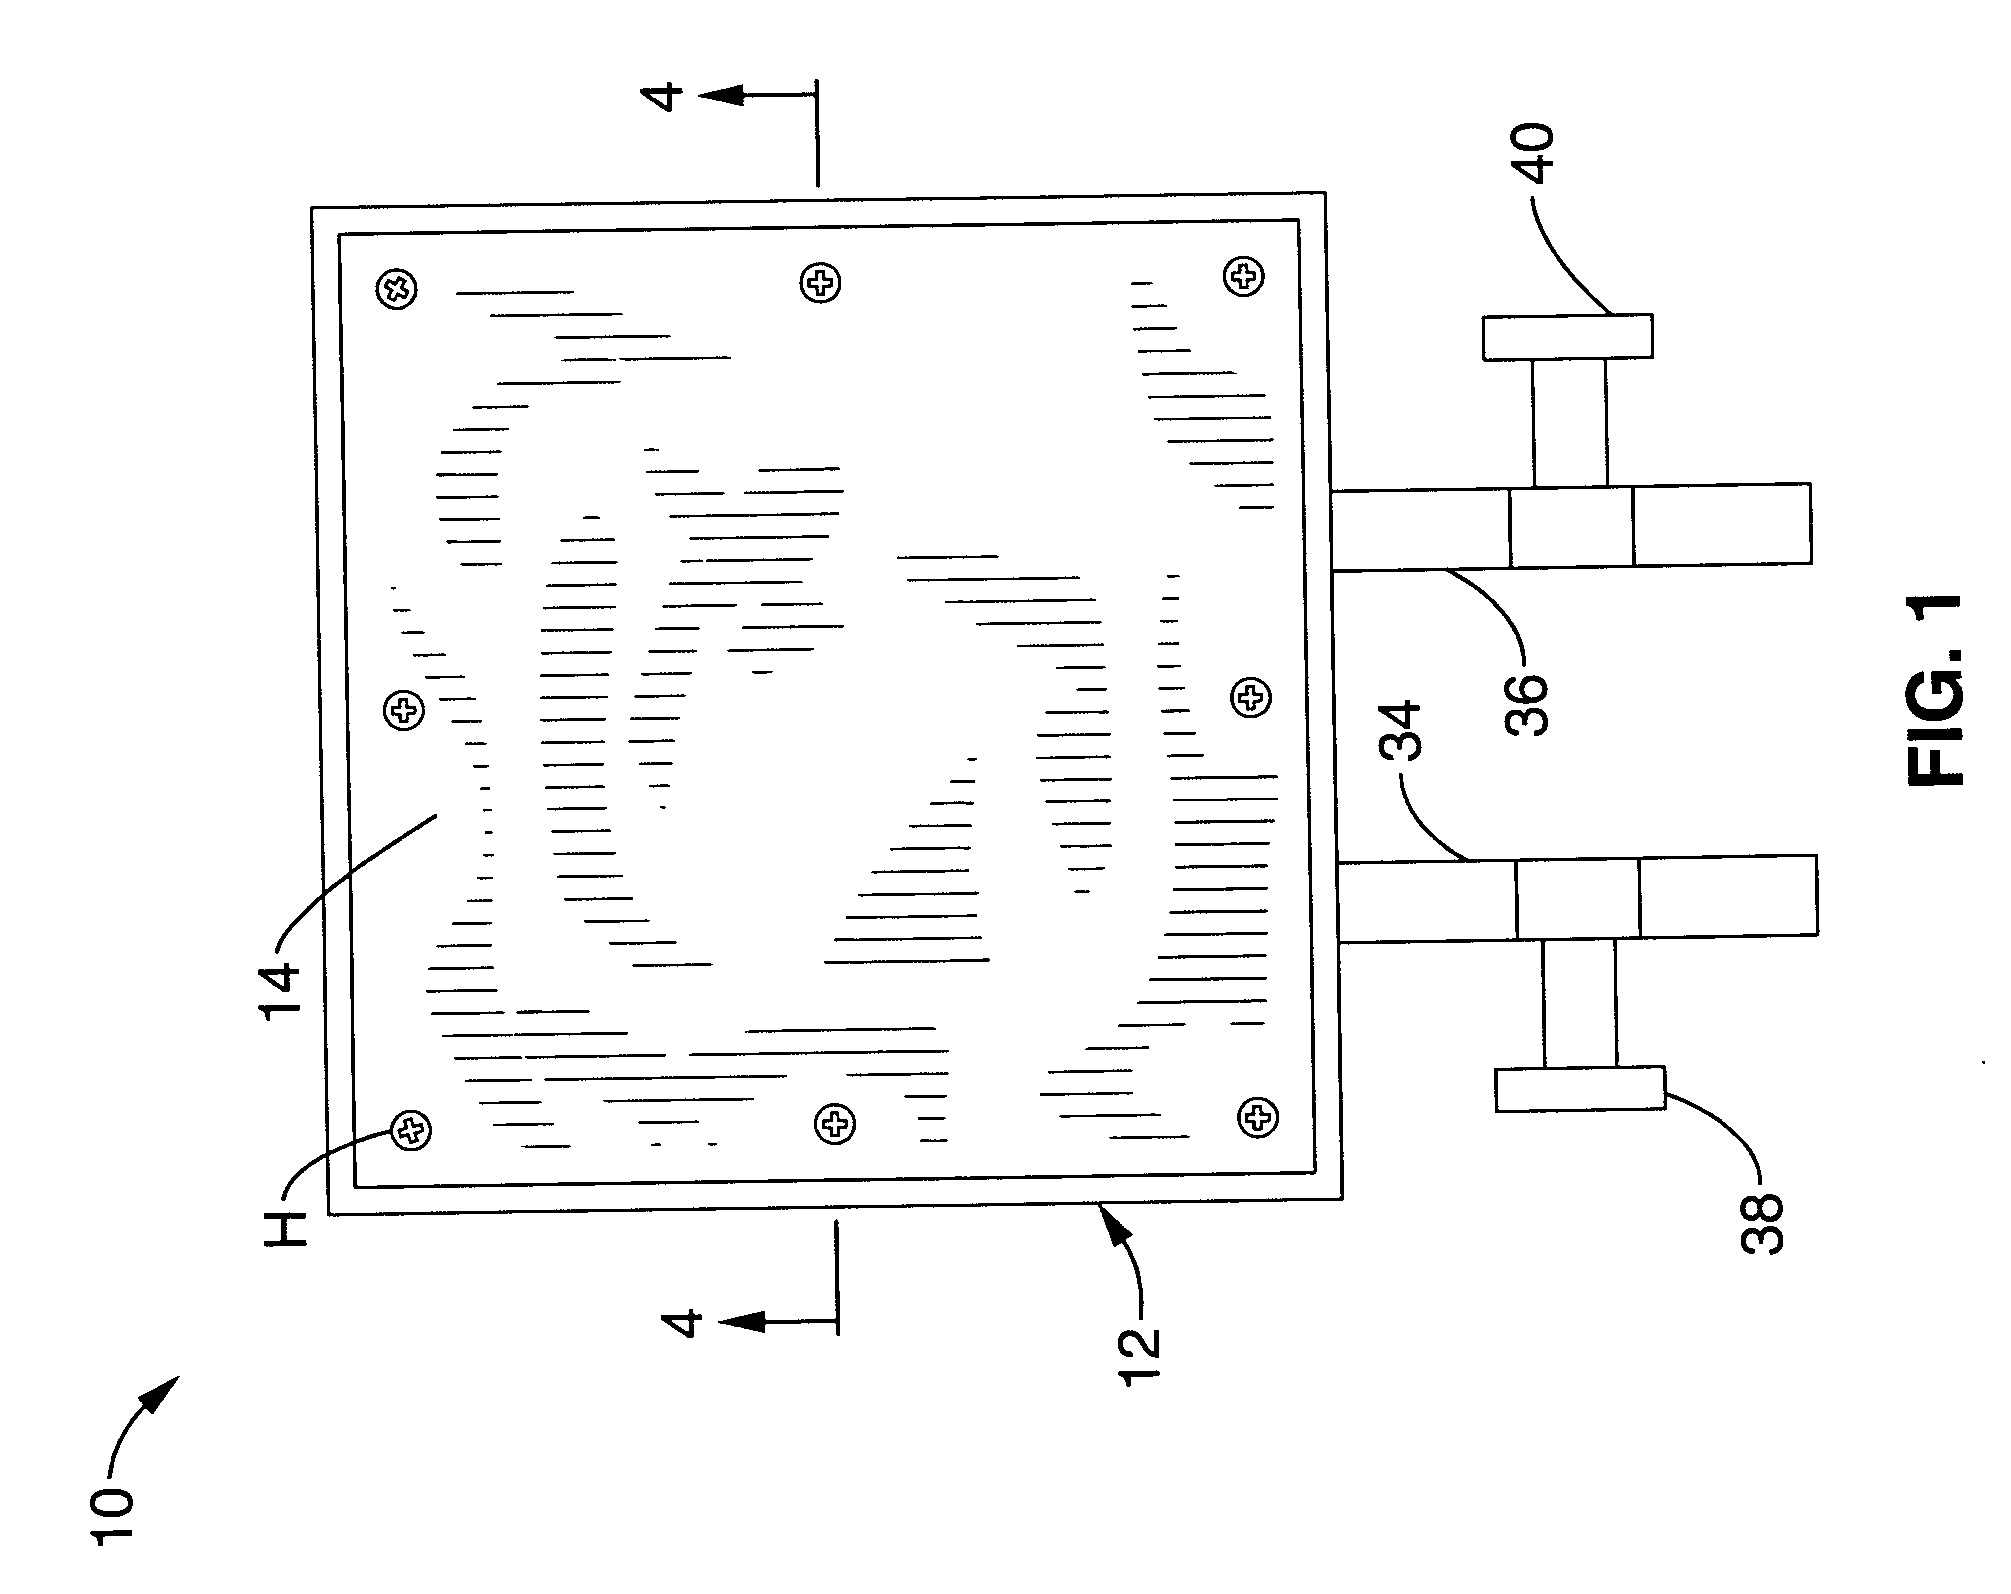 Neutron and gamma detector using an ionization chamber with an integrated body and moderator